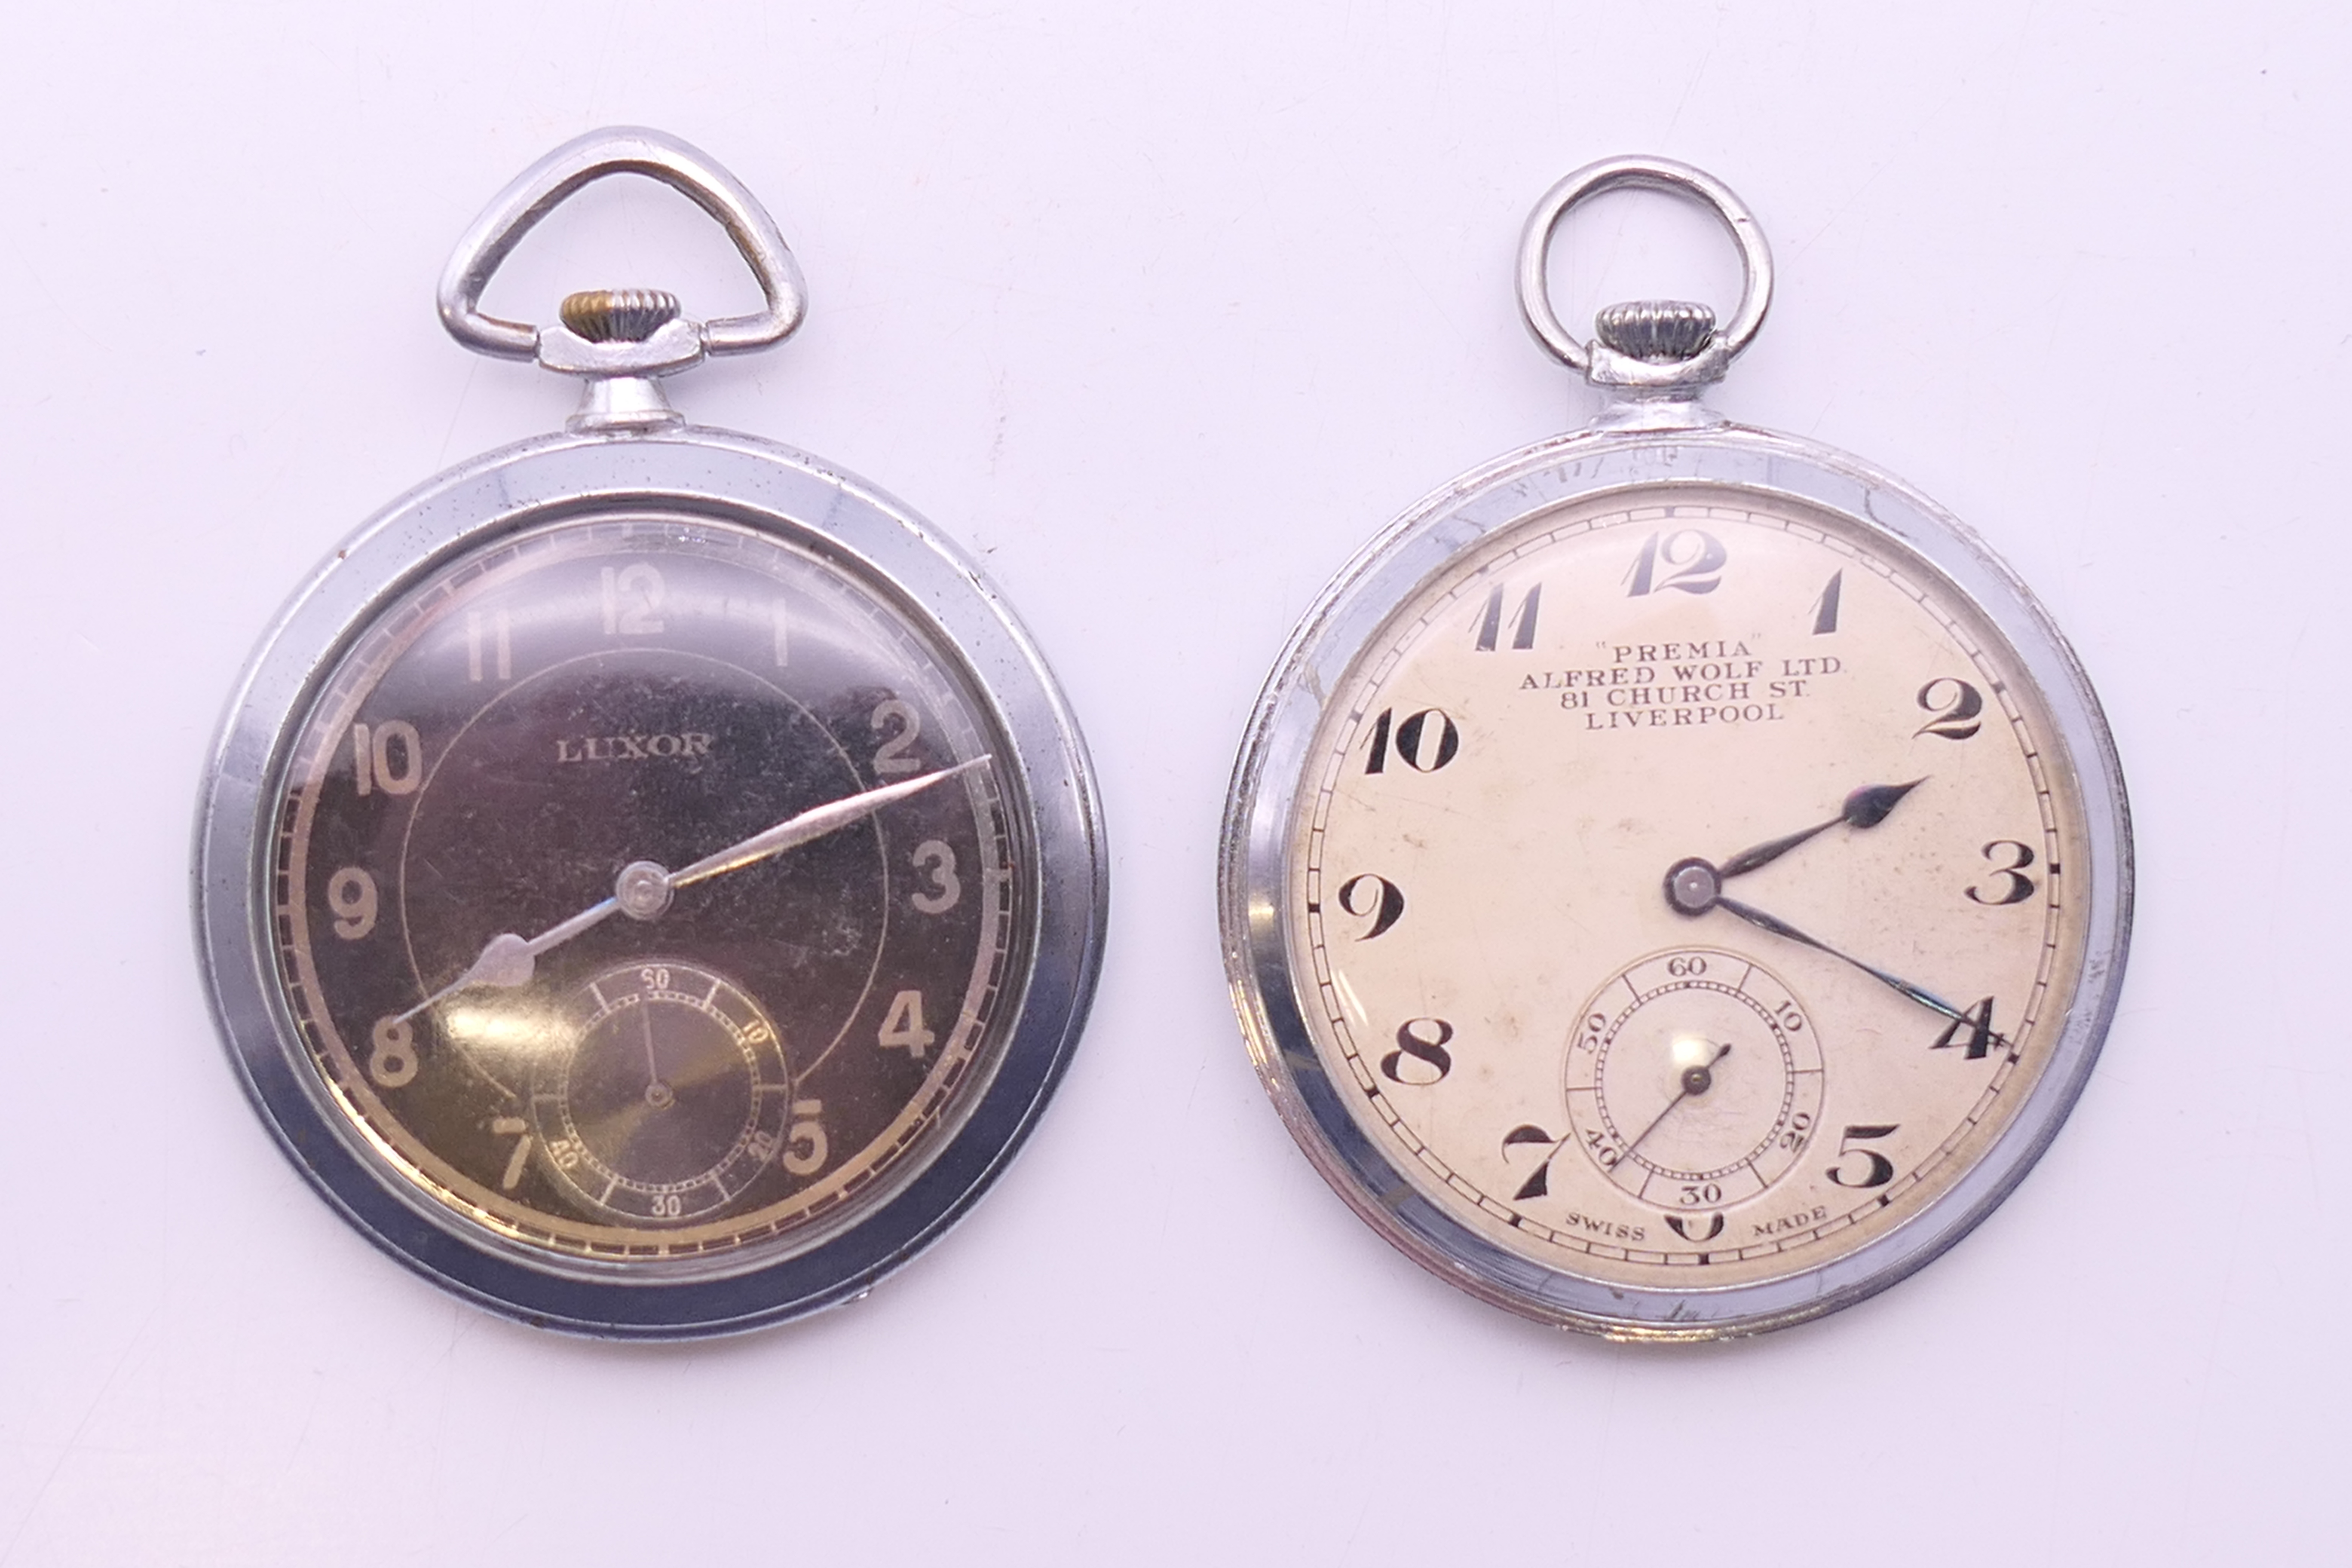 Two Art Deco gentleman's pocket watches, one marked Luxor, the other marked Premia Alfred Wolf Ltd, - Image 2 of 23